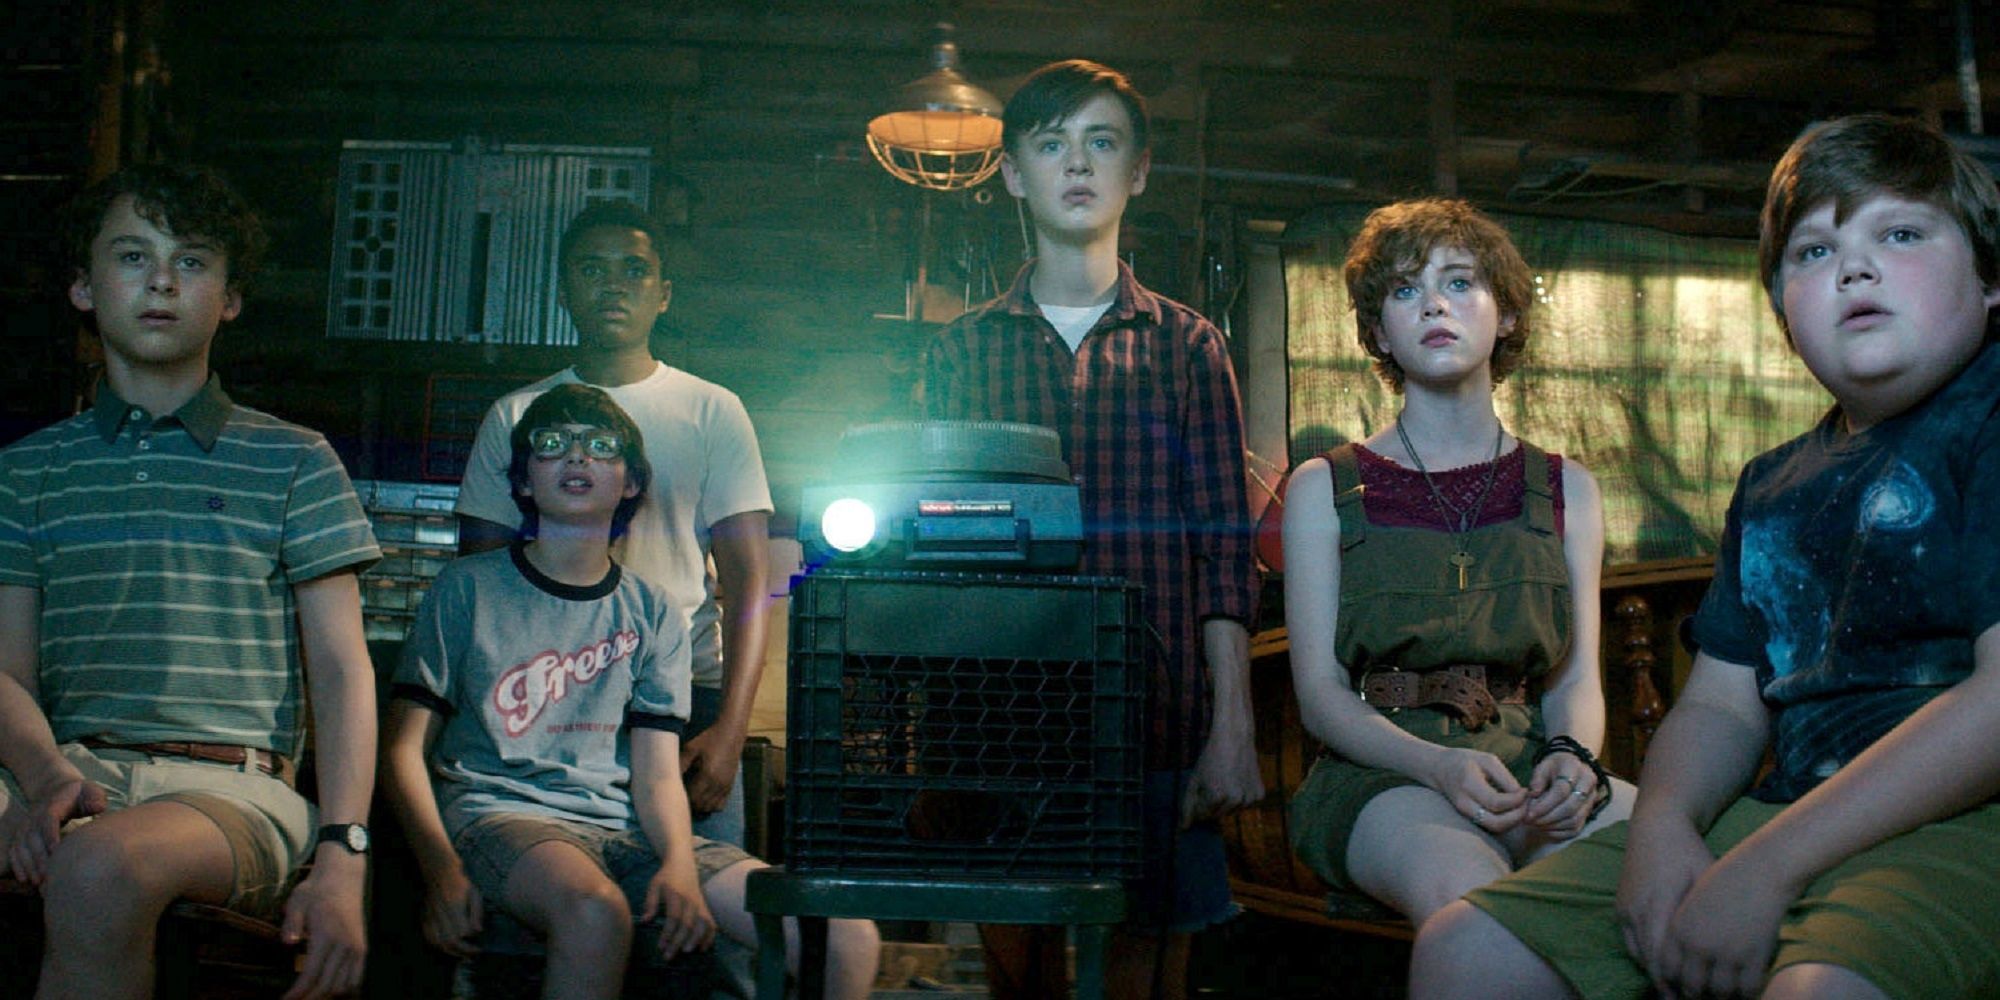 Losers Club watching the movie in the basement of 'It'.